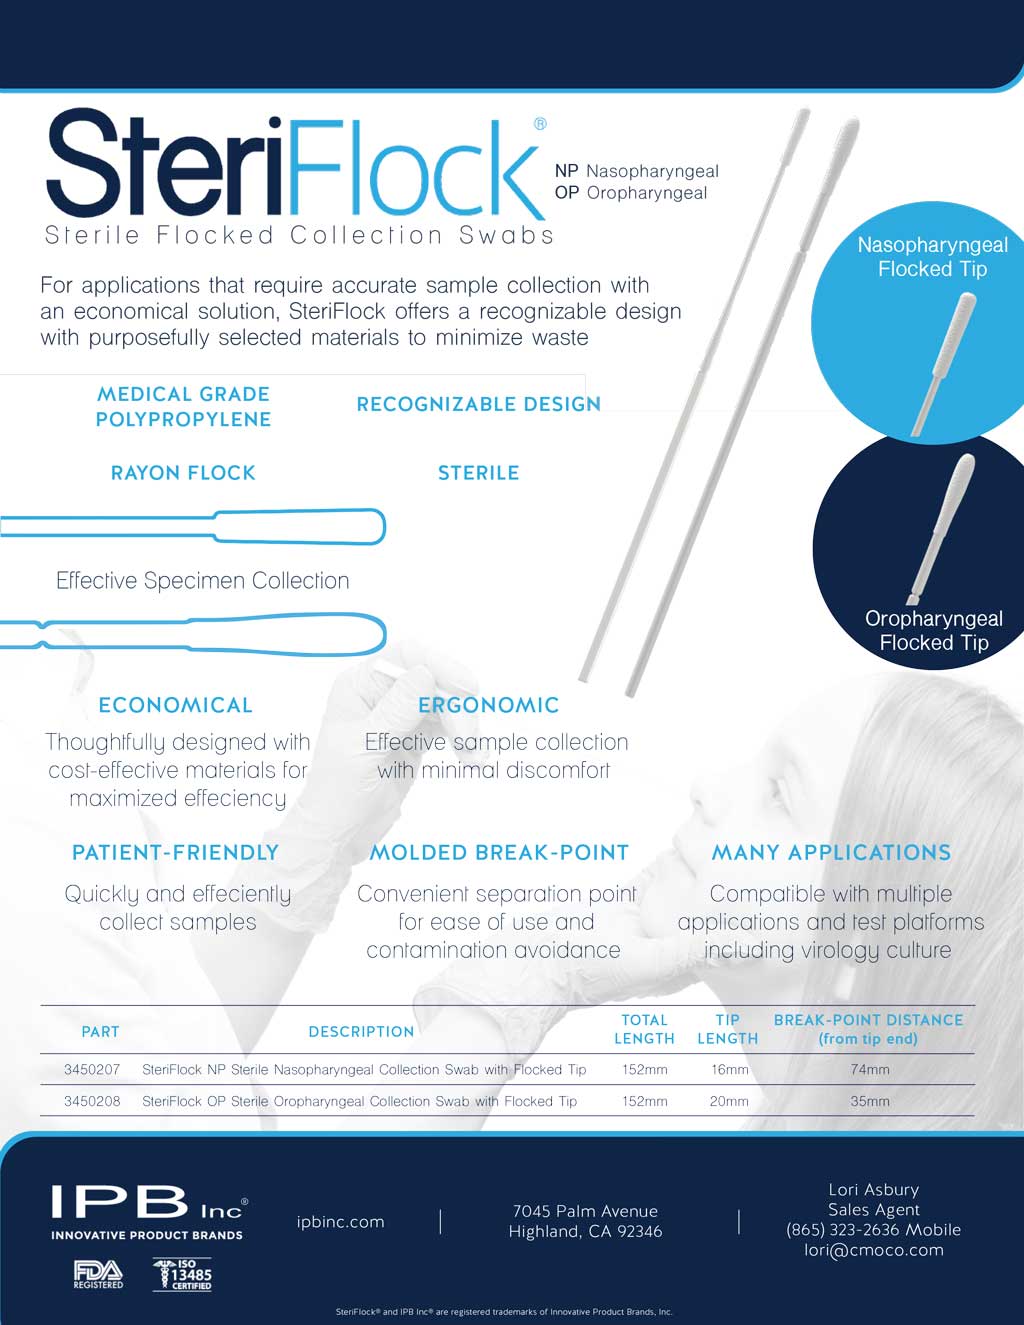 This SteriFlock Sell Sheet provides an overview of the medical testing swabs available through CMOco.